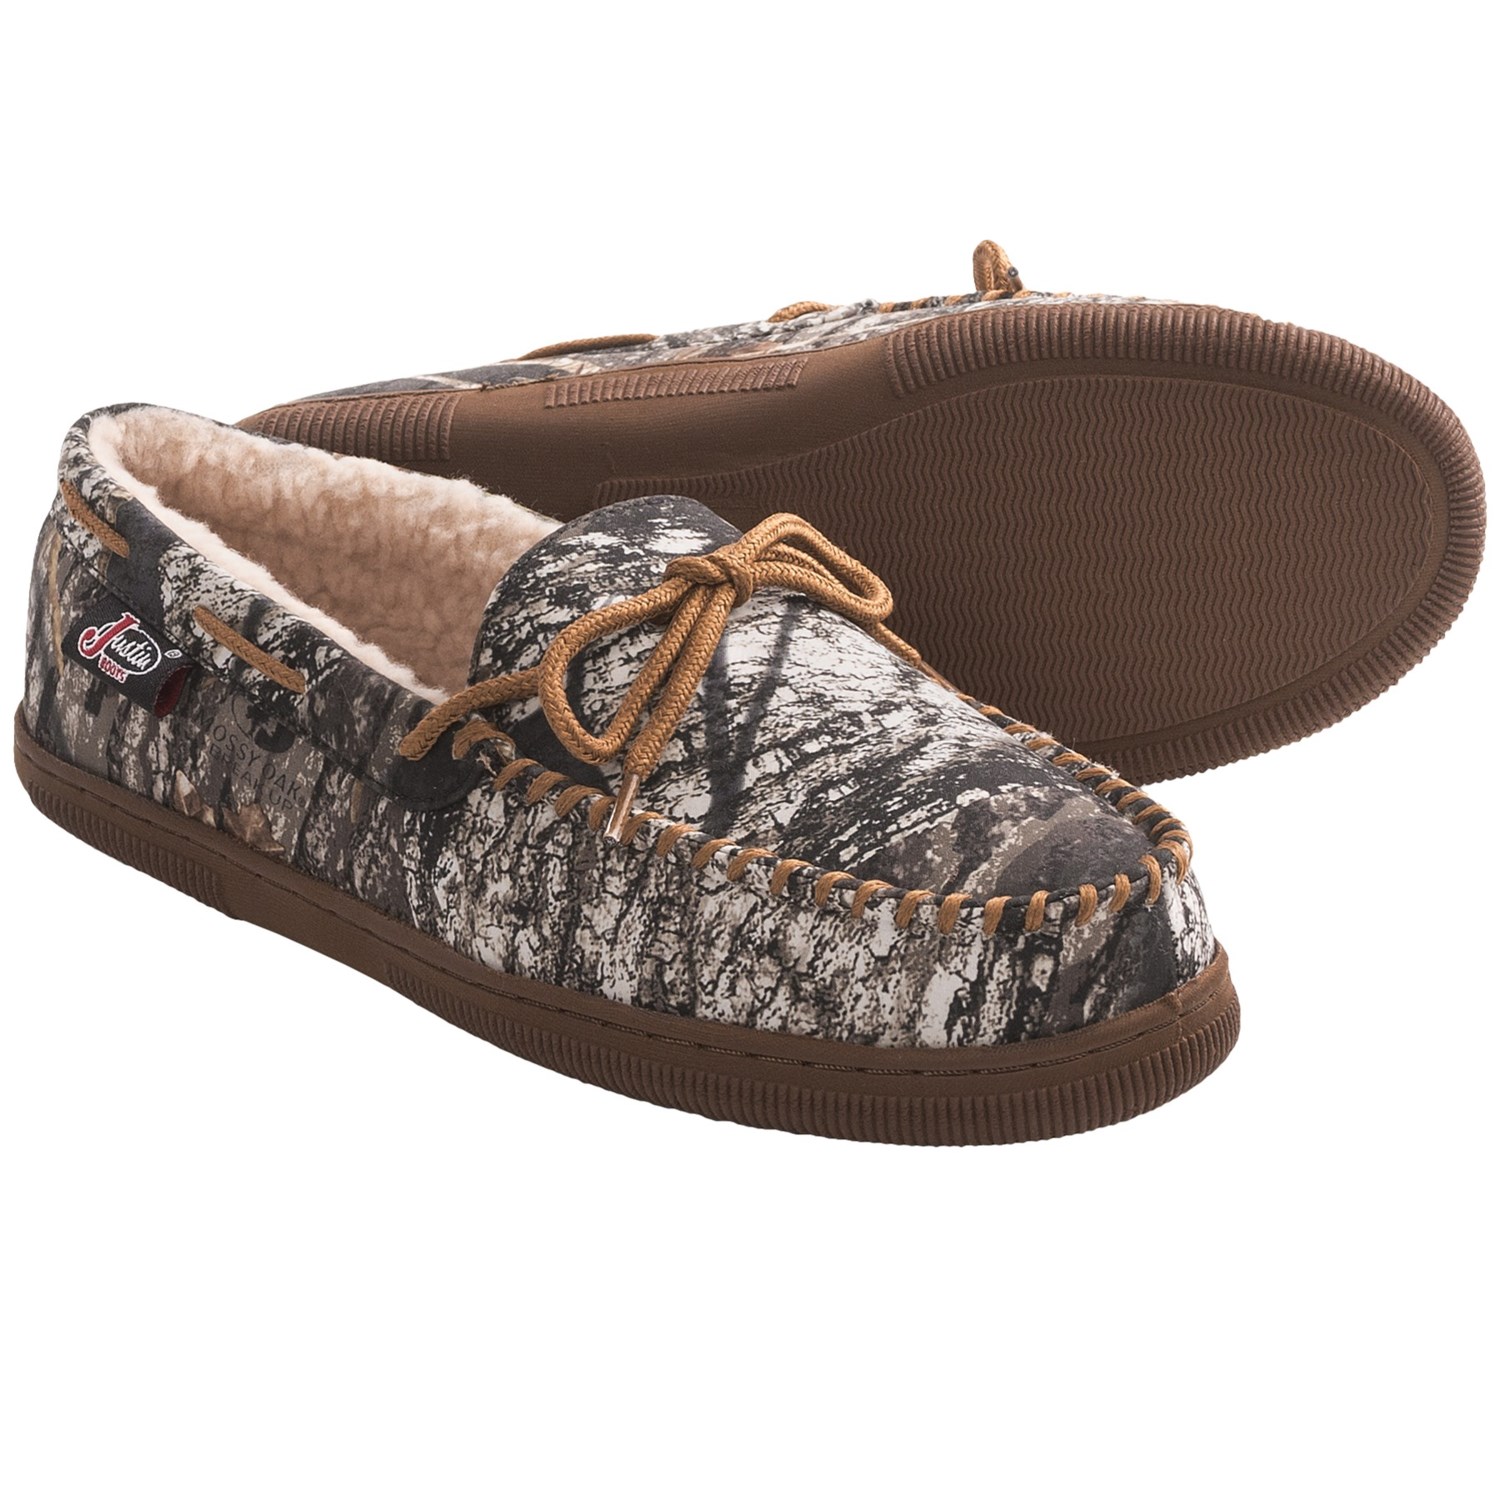 Justin Boots Mossy Oak® Moccasin Slippers (For Men) 6723A - Save 50%